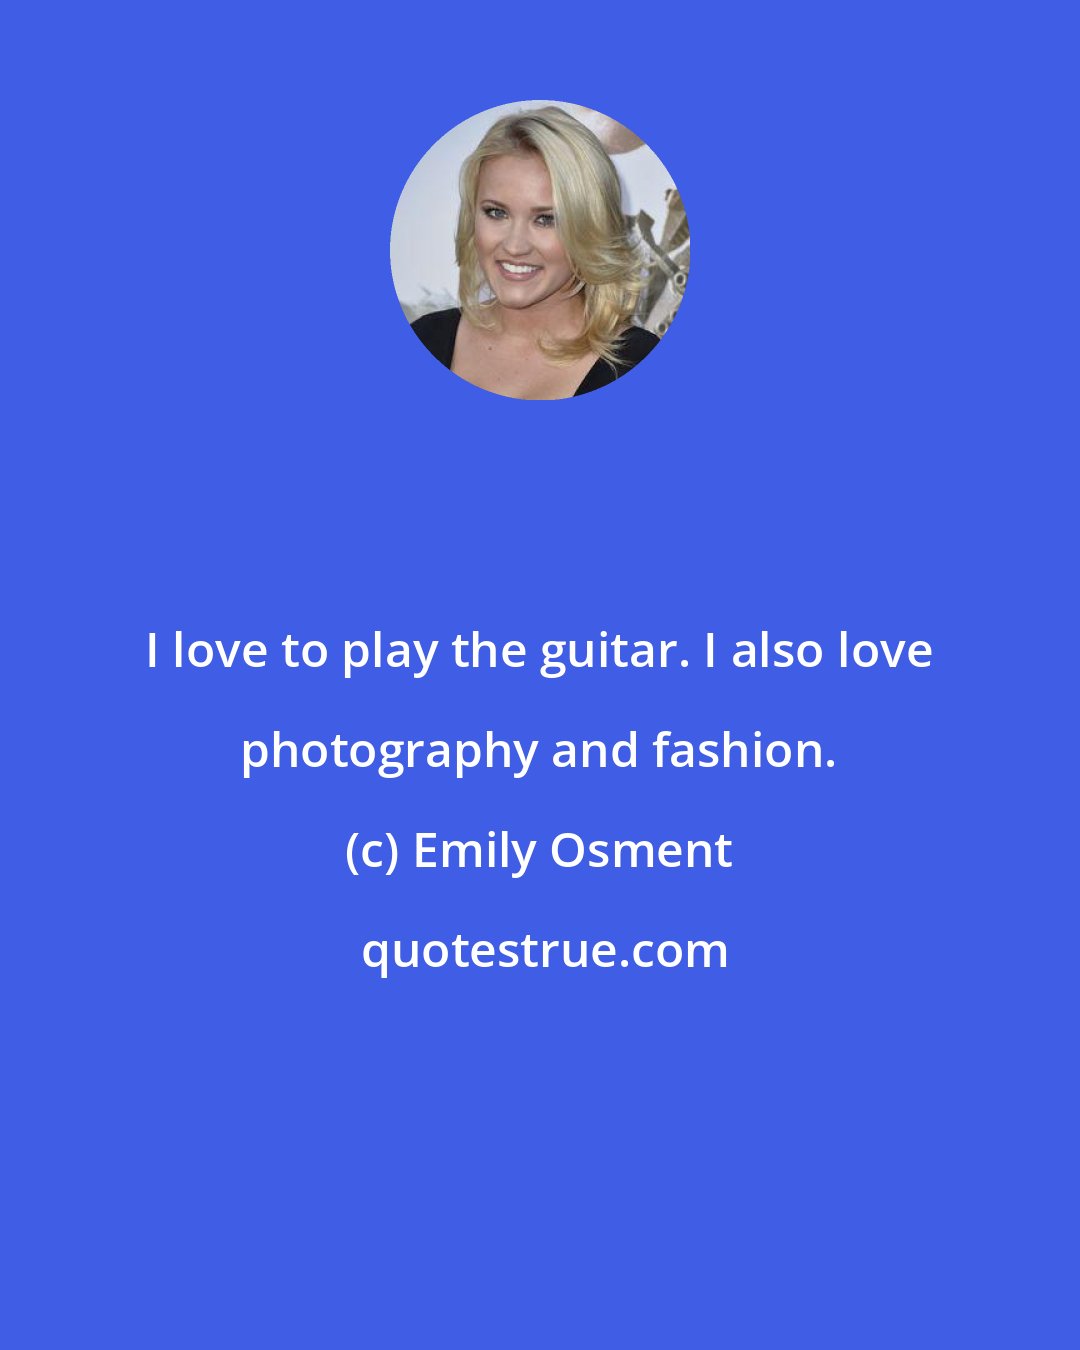 Emily Osment: I love to play the guitar. I also love photography and fashion.